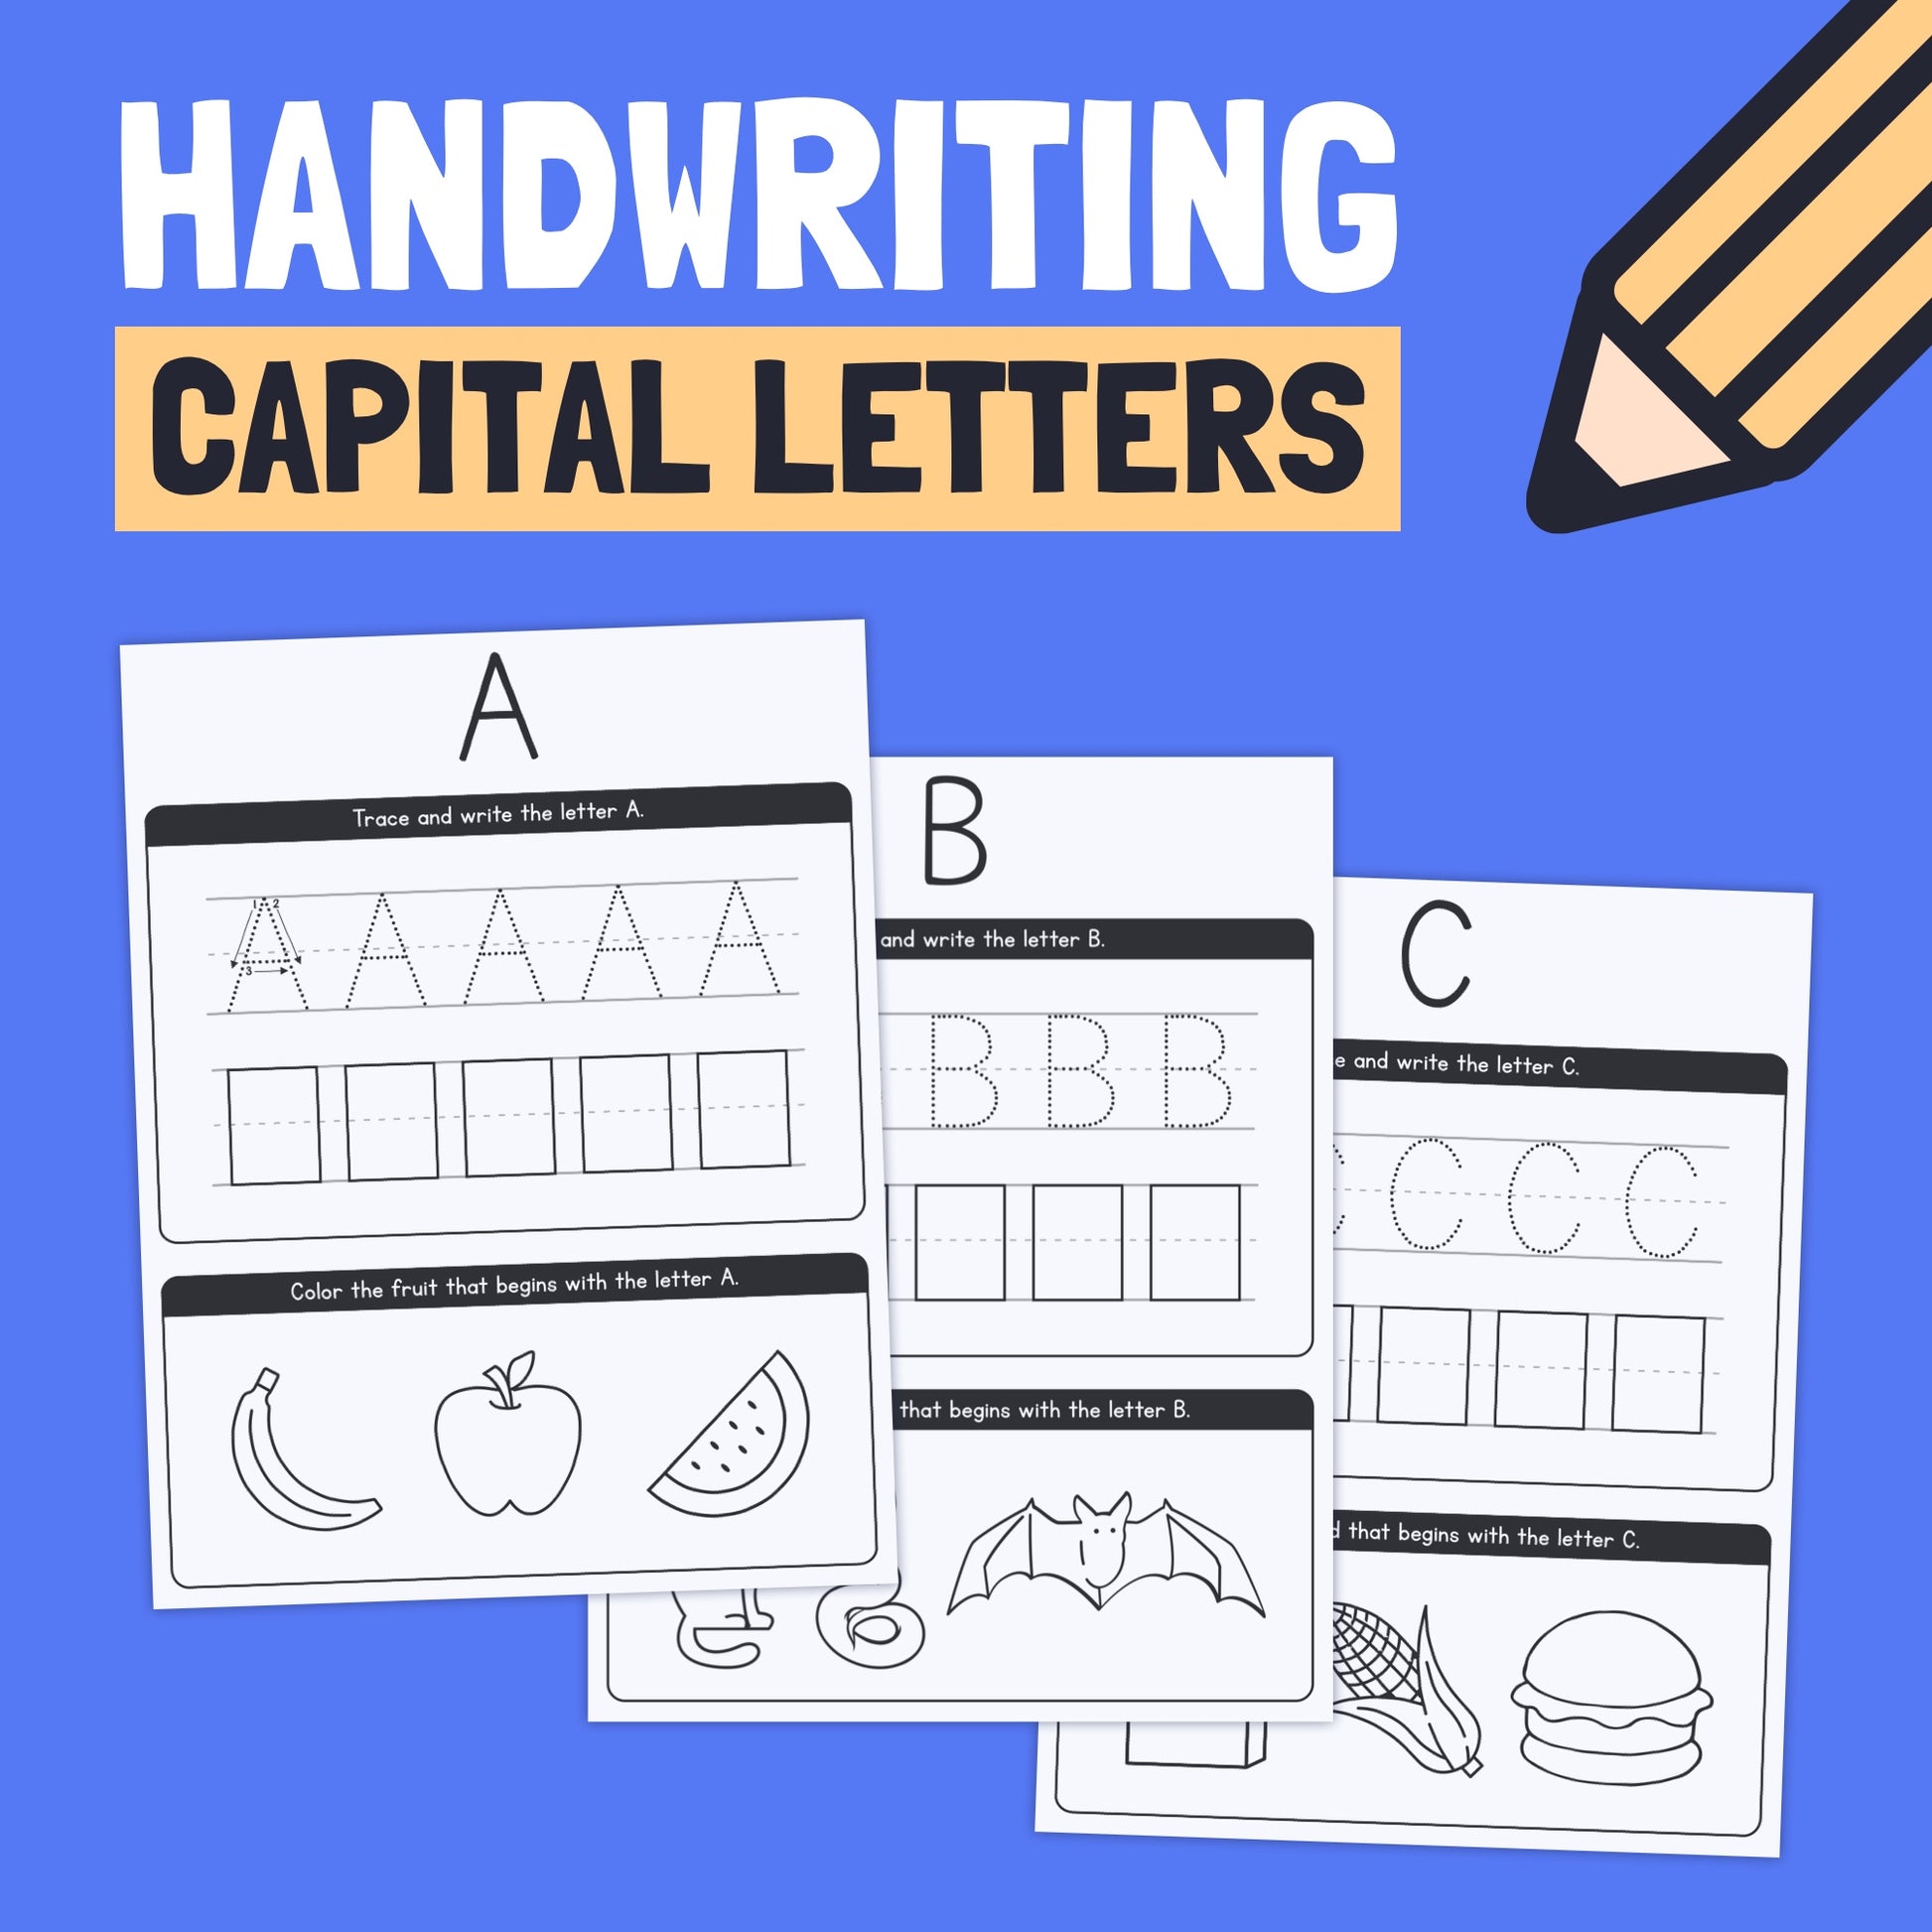 Handwriting capital letters, tracing and letterforms